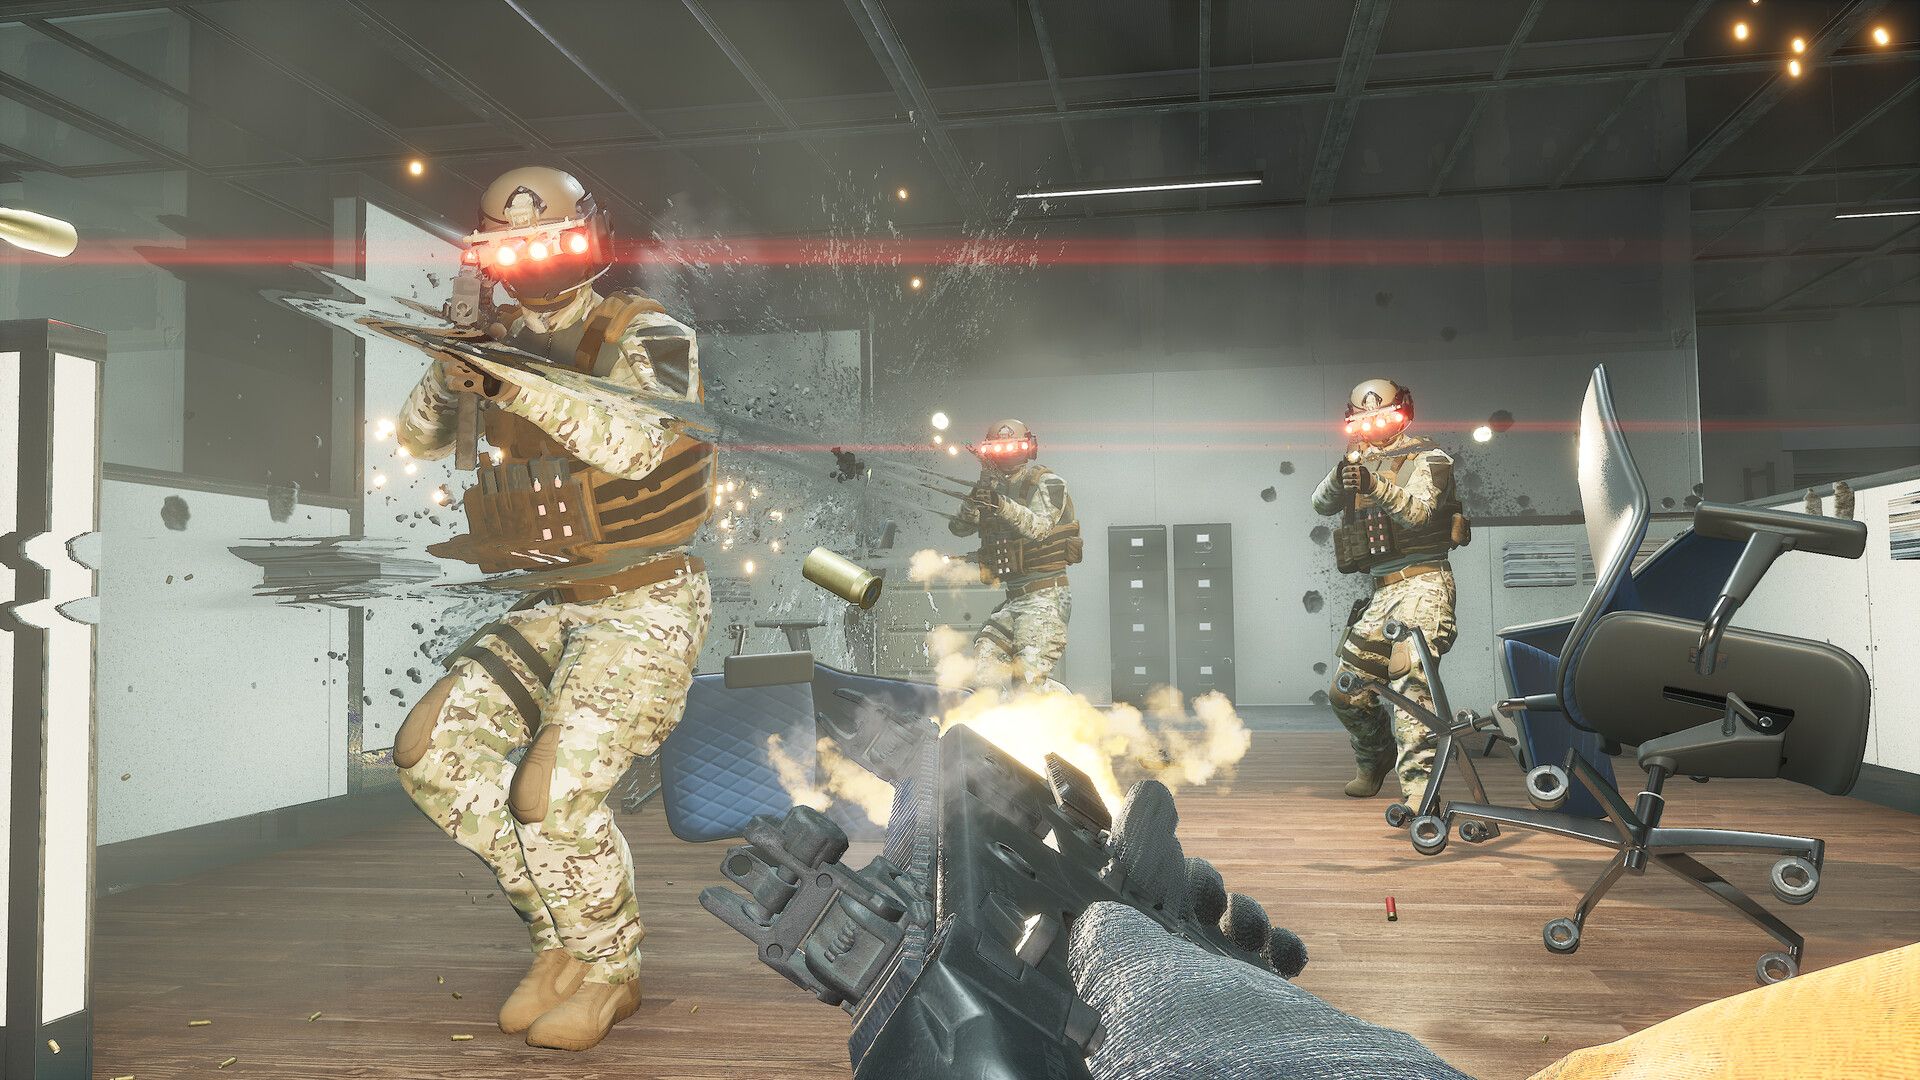 Three armed soldiers rush the player character in an office space.